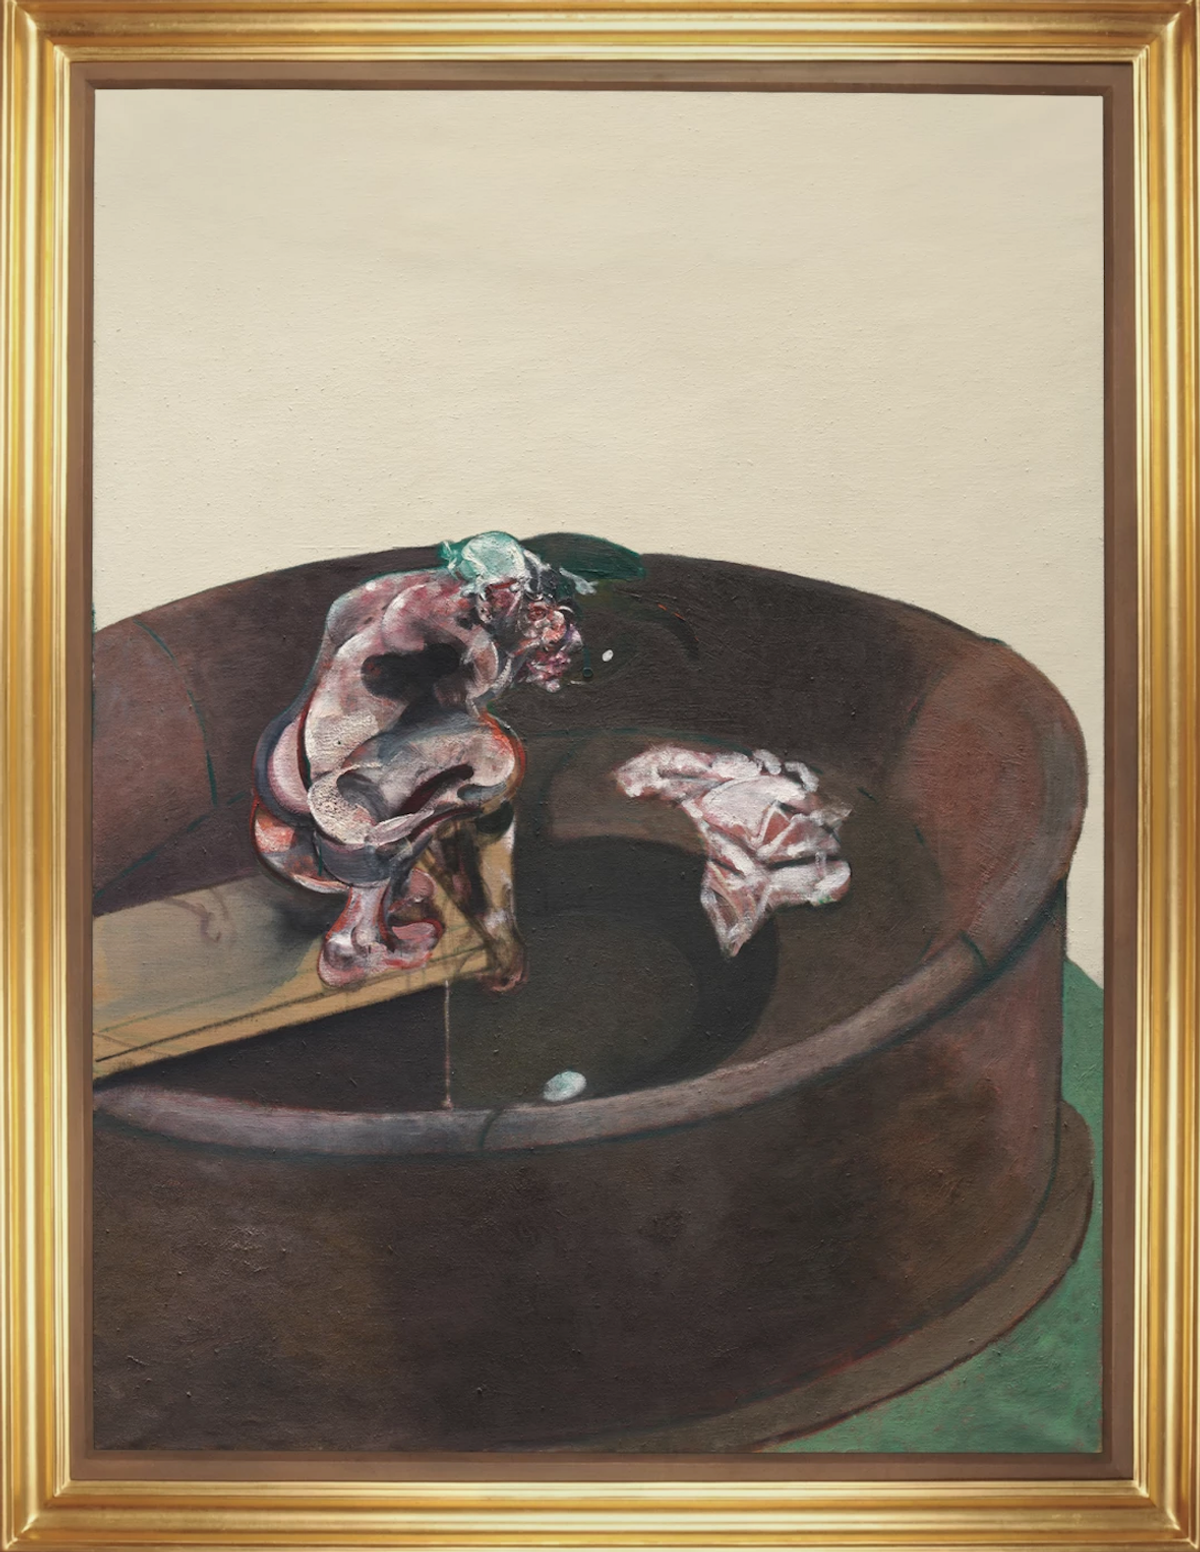 Francis Bacon's Portrait of George Dyer Crouching (1966)

Courtesy of Sotheby's